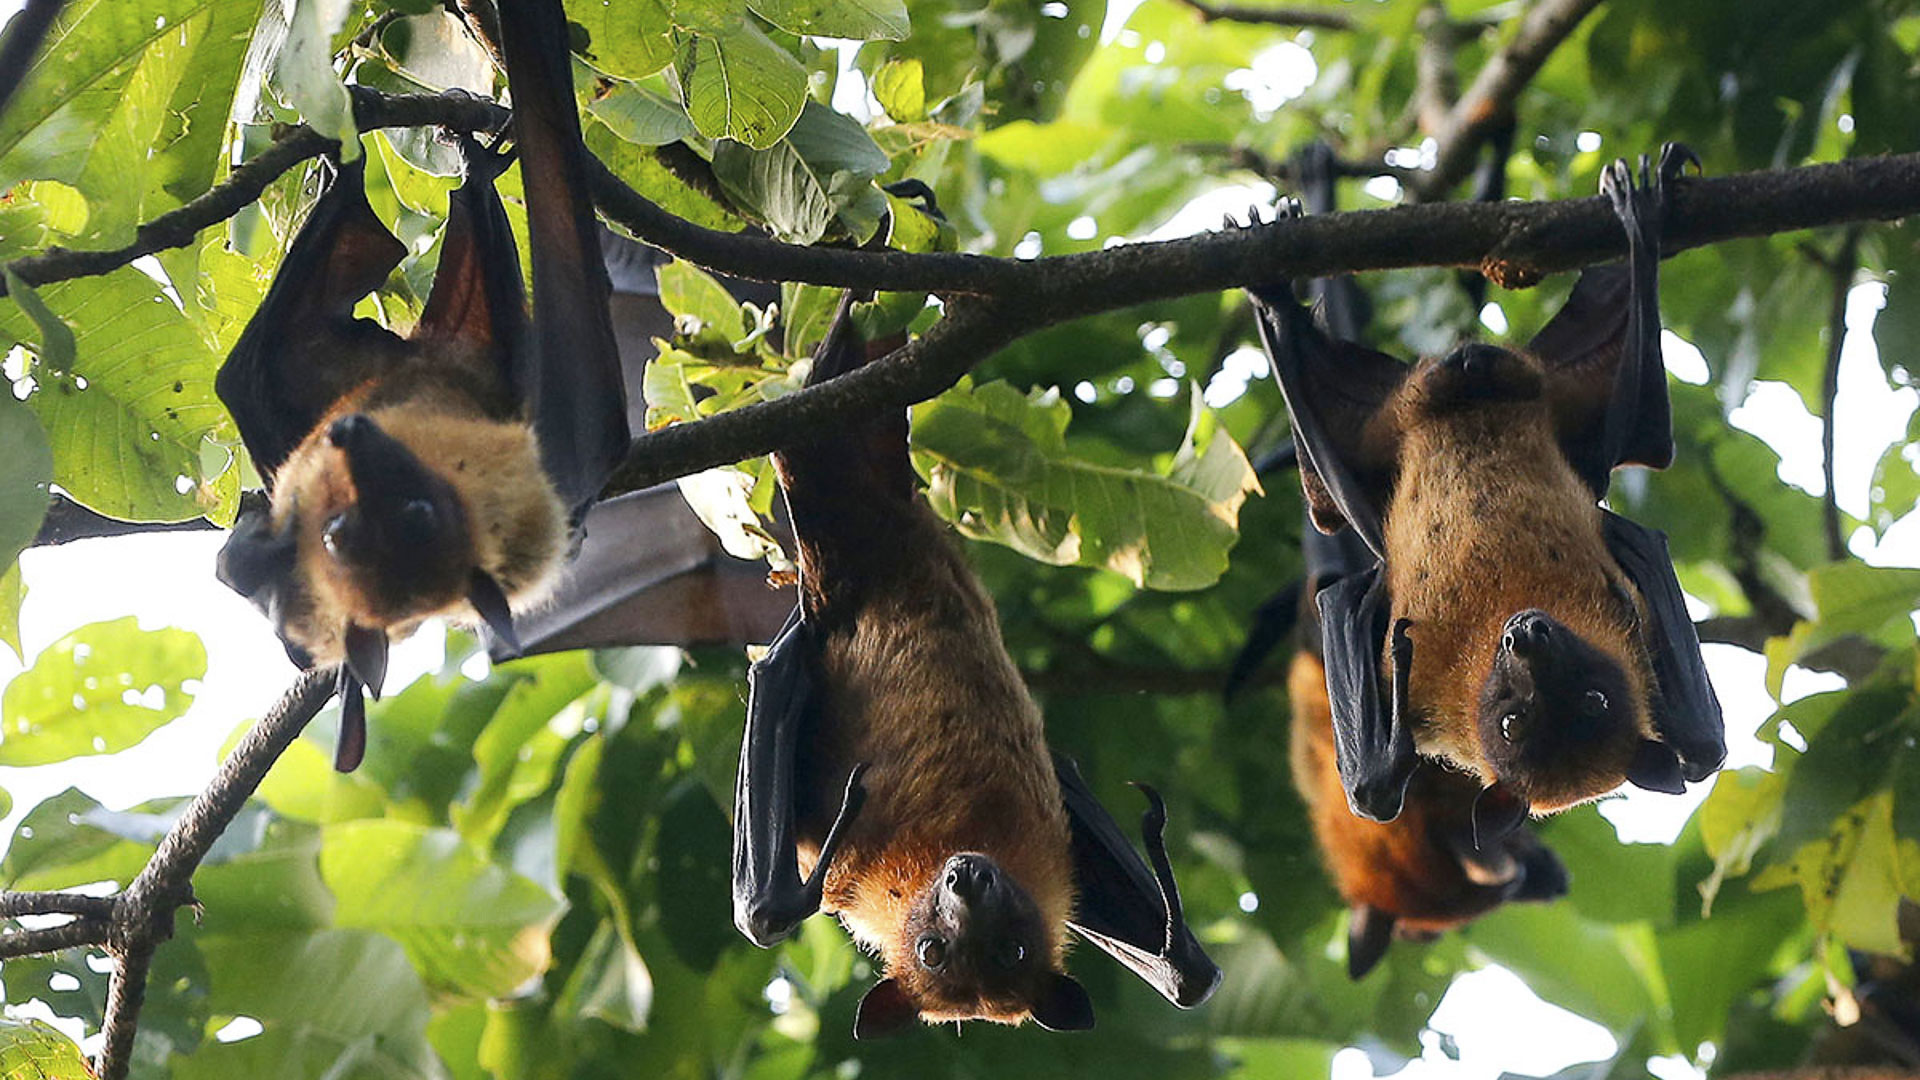 Outbreaks of the Nipah virus have been traced back to flying foxes, a fruit bat found across tropical Asia. Above, the animals hang from a tree in the Indian state of Kerala. REUTERS/Sivaram V